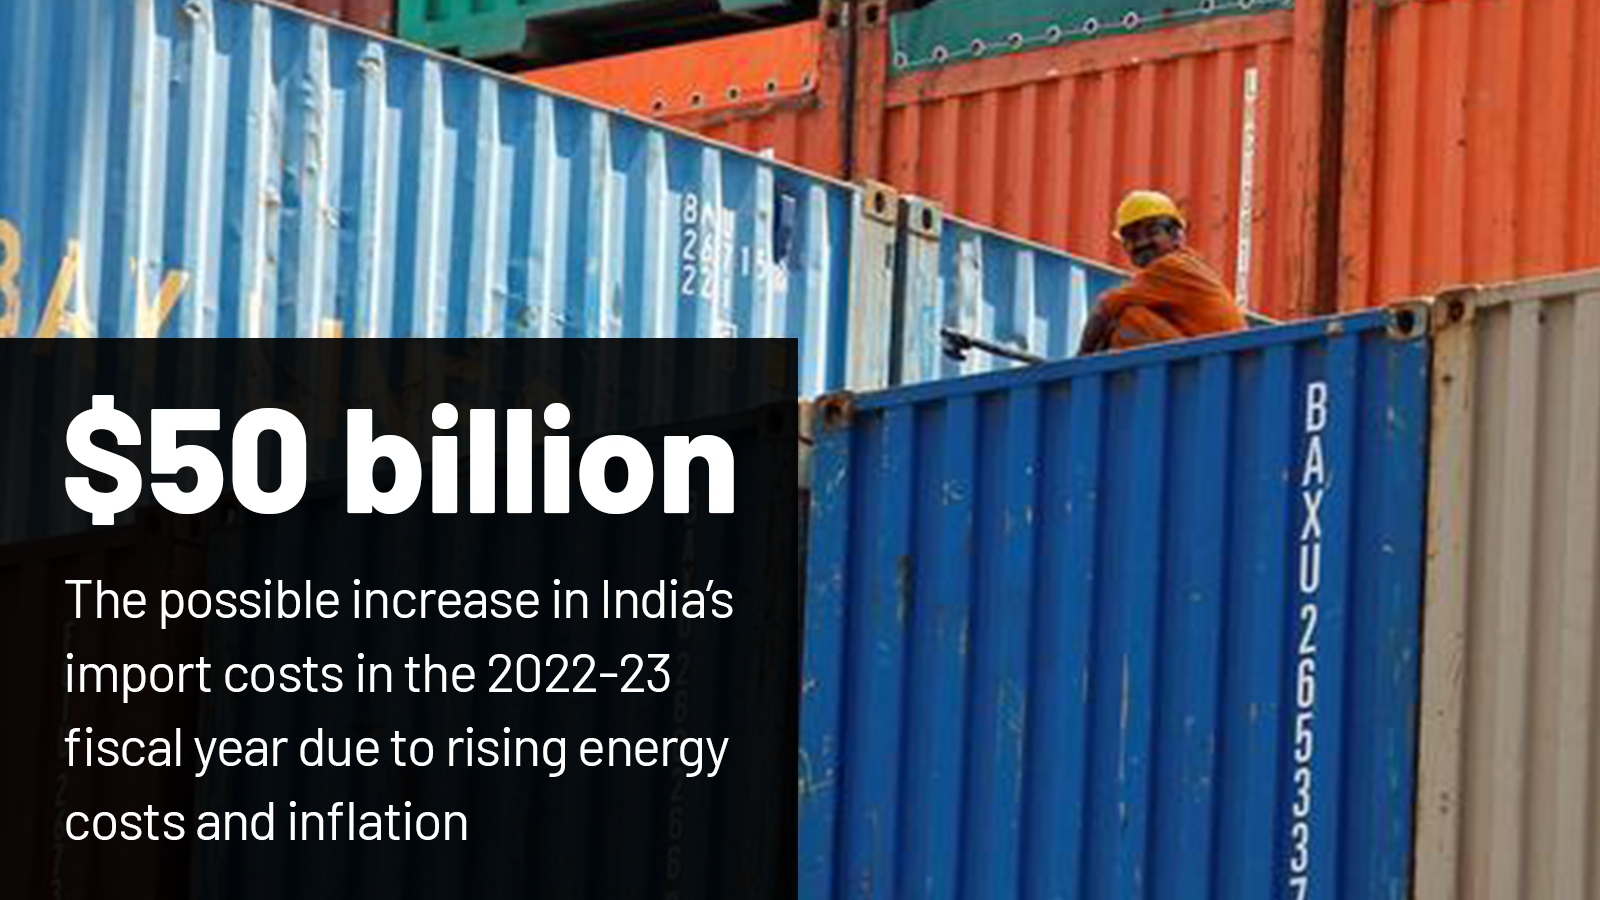 India’s import costs could increase by $50 billion in the 2022-23 fiscal year due to rising energy costs and inflation.